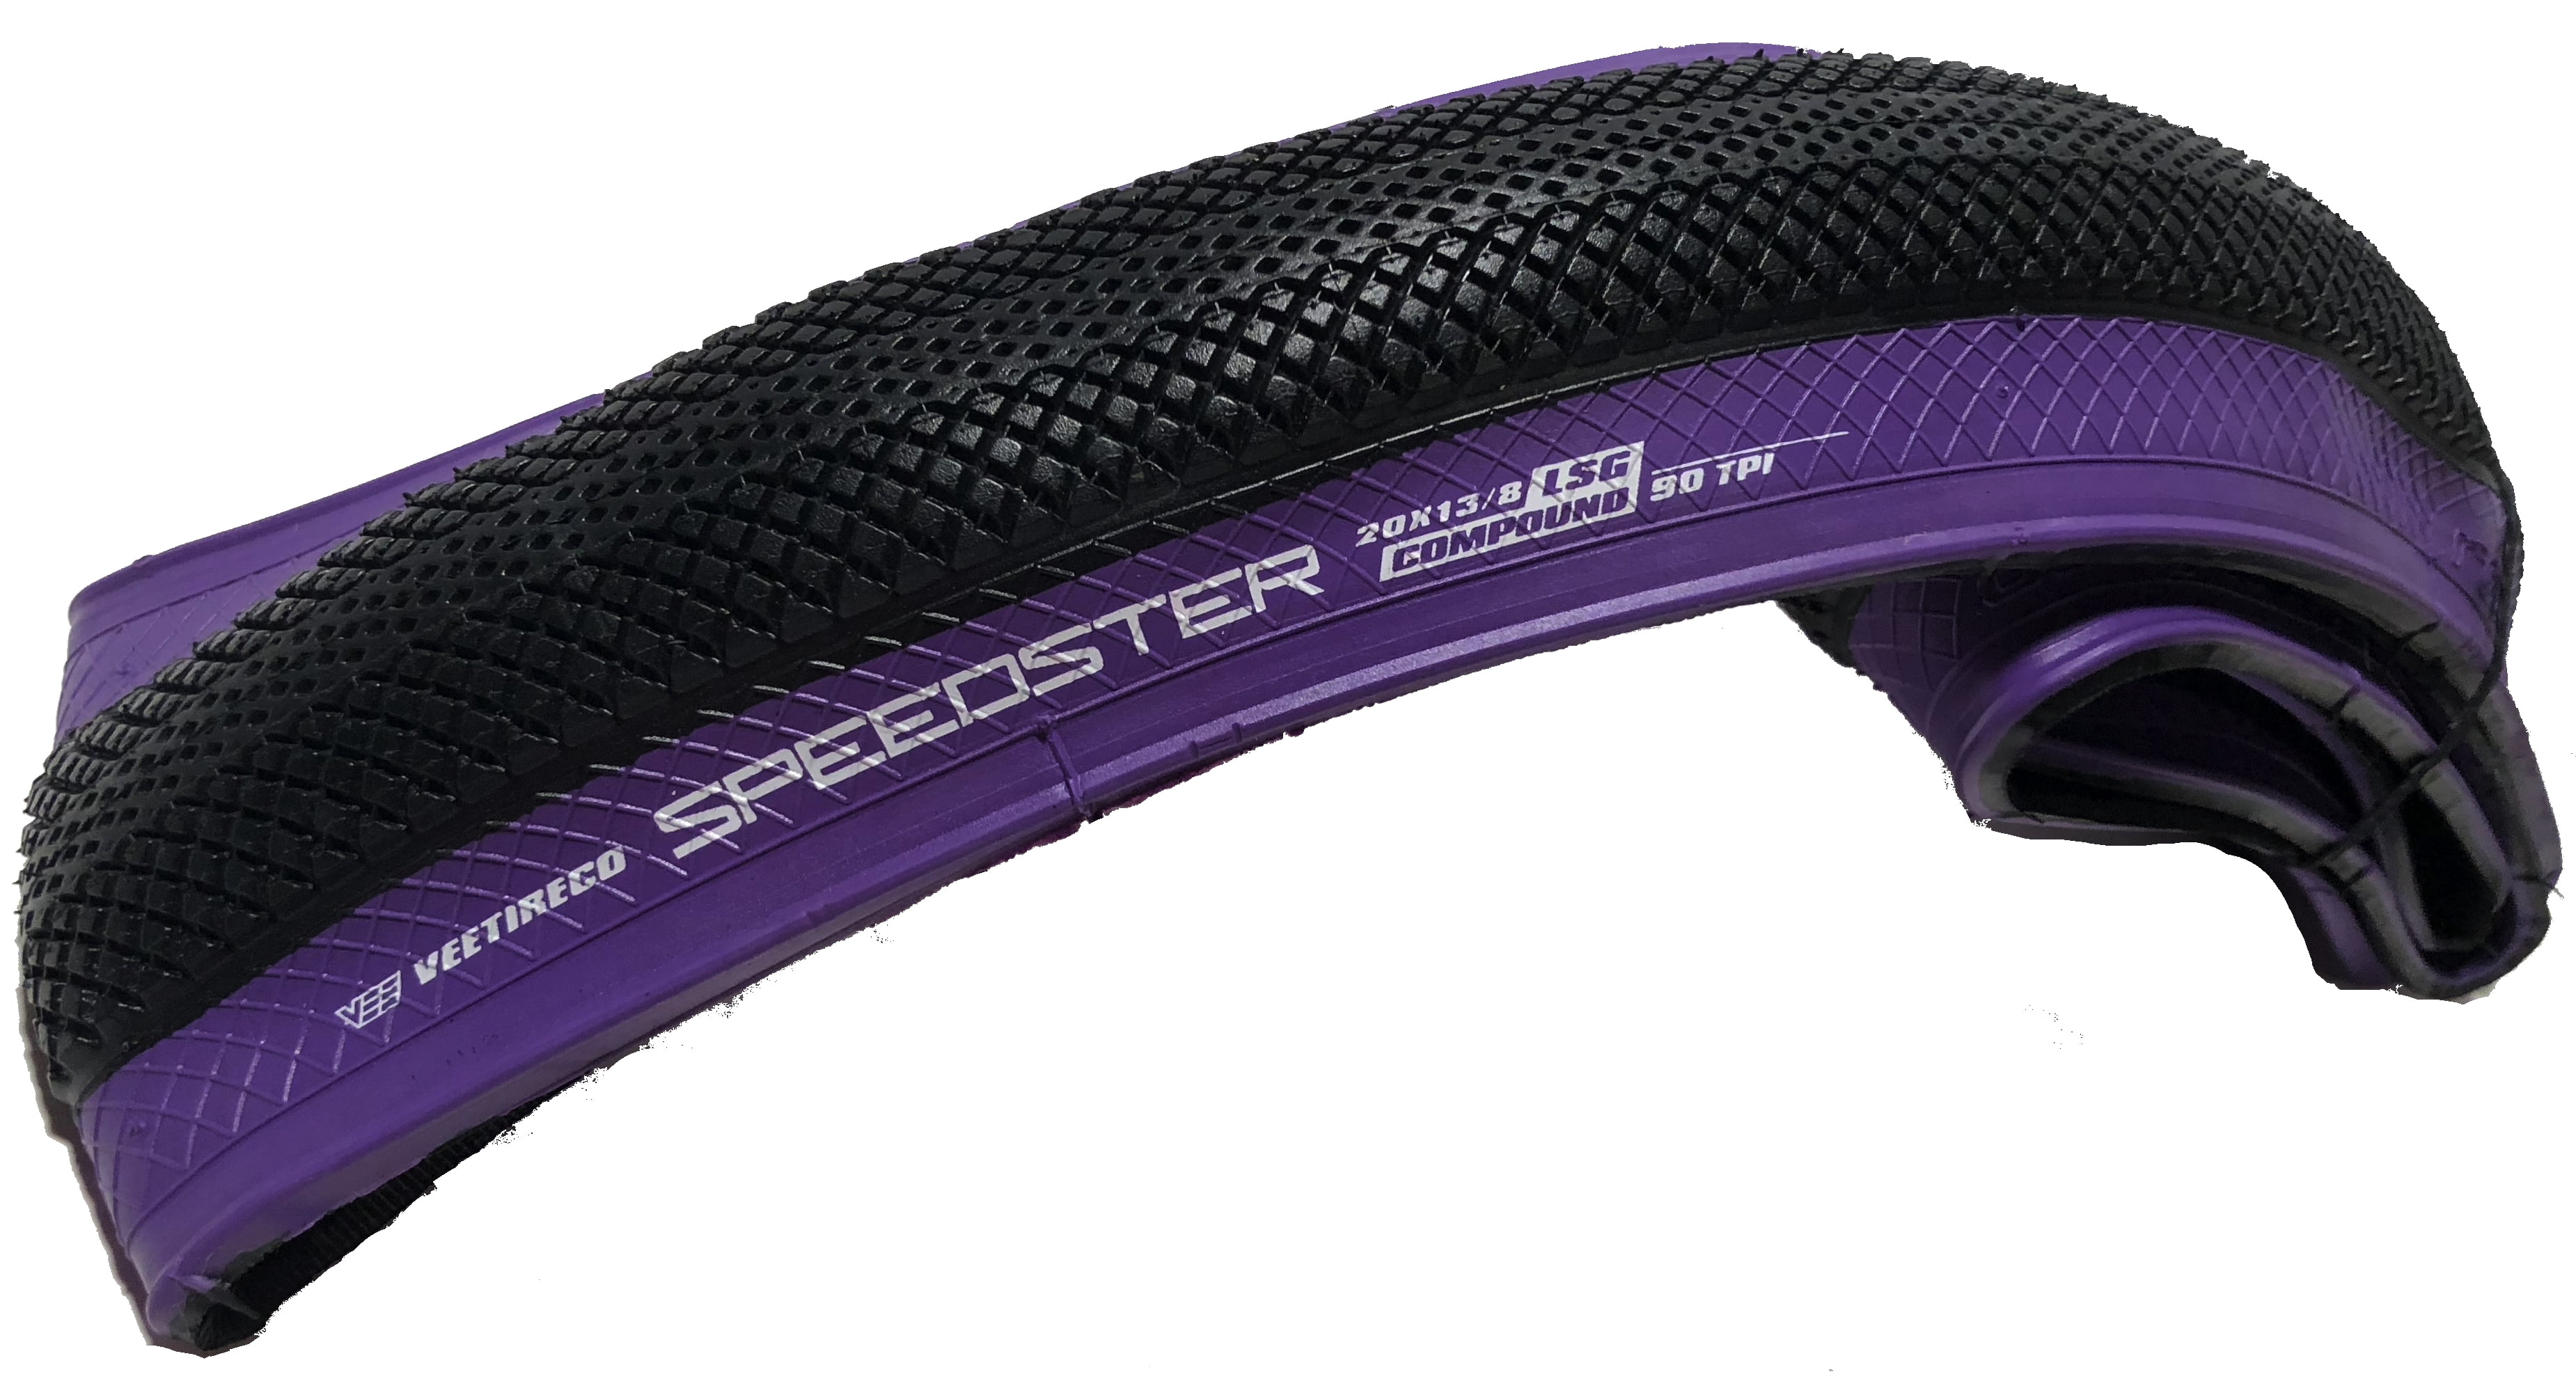 2 Vee Bmx Speedster x1 1 8 Pair Of Folding Bead Purple Bike Tires 37 451 Cycling Indiarealestatereviews Bicycle Tires Tubes Wheels